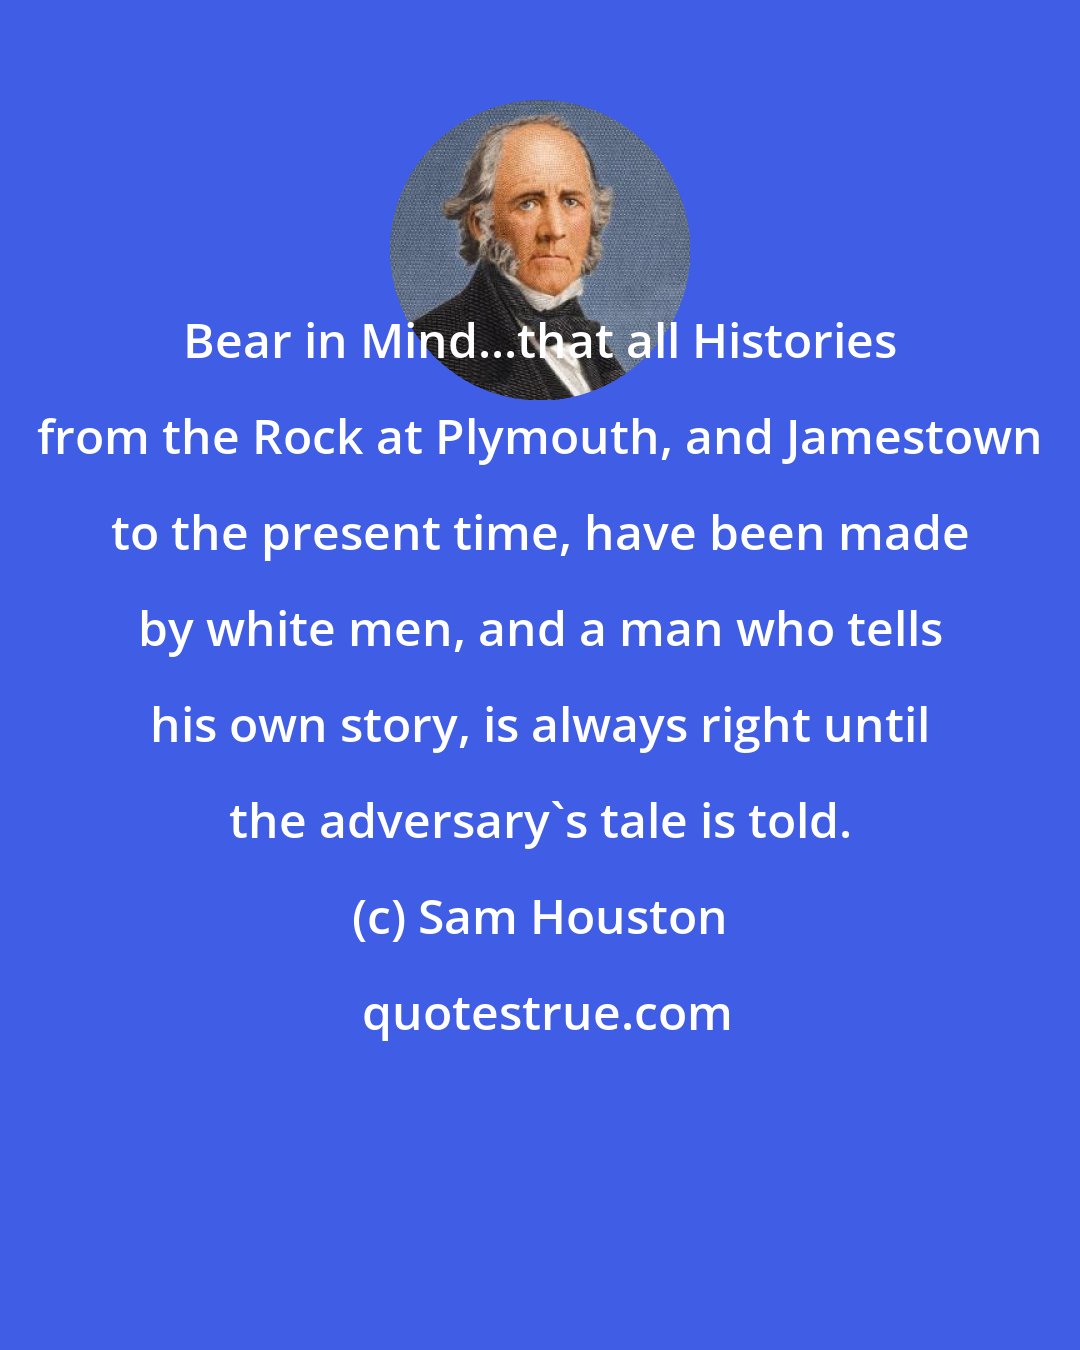 Sam Houston: Bear in Mind...that all Histories from the Rock at Plymouth, and Jamestown to the present time, have been made by white men, and a man who tells his own story, is always right until the adversary's tale is told.